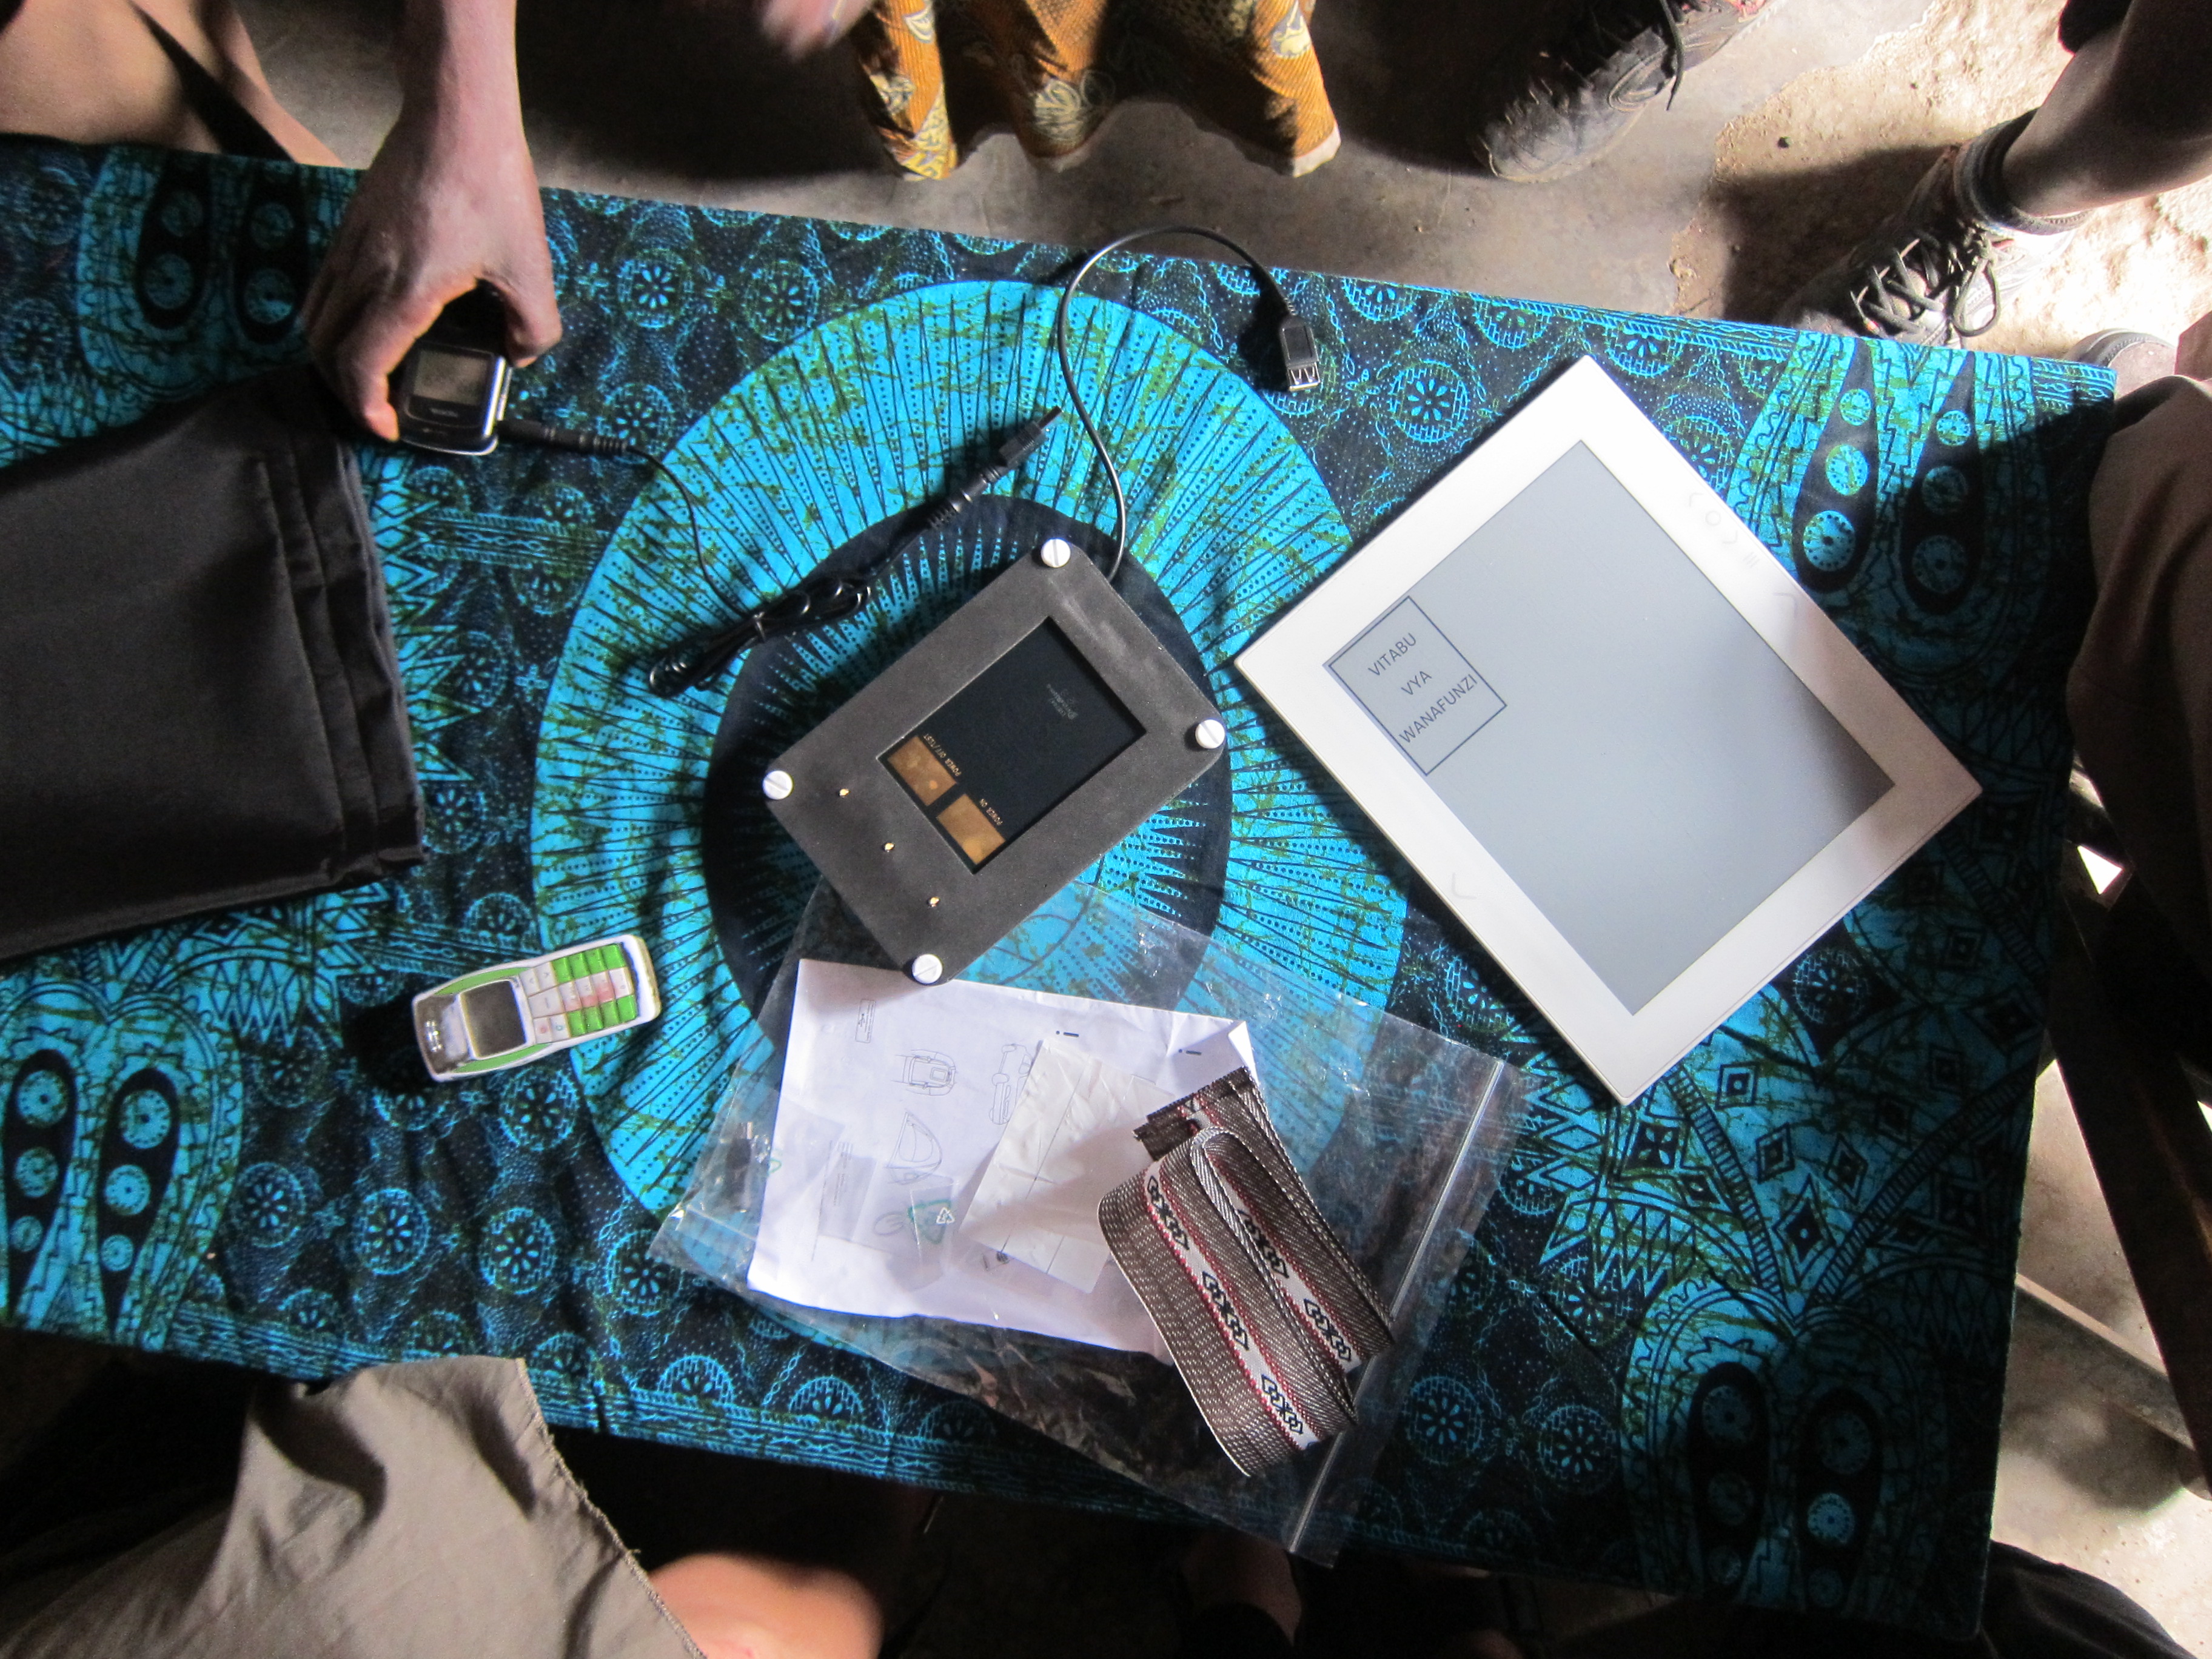 To begin with, school textbooks were loaded onto ten e-readers (one on the right). Educational updates and other material were then uploaded to an online ‘cloud’ server from which they were downloaded to the e-readers using a wireless Bluetooth connection on a smartphone.
